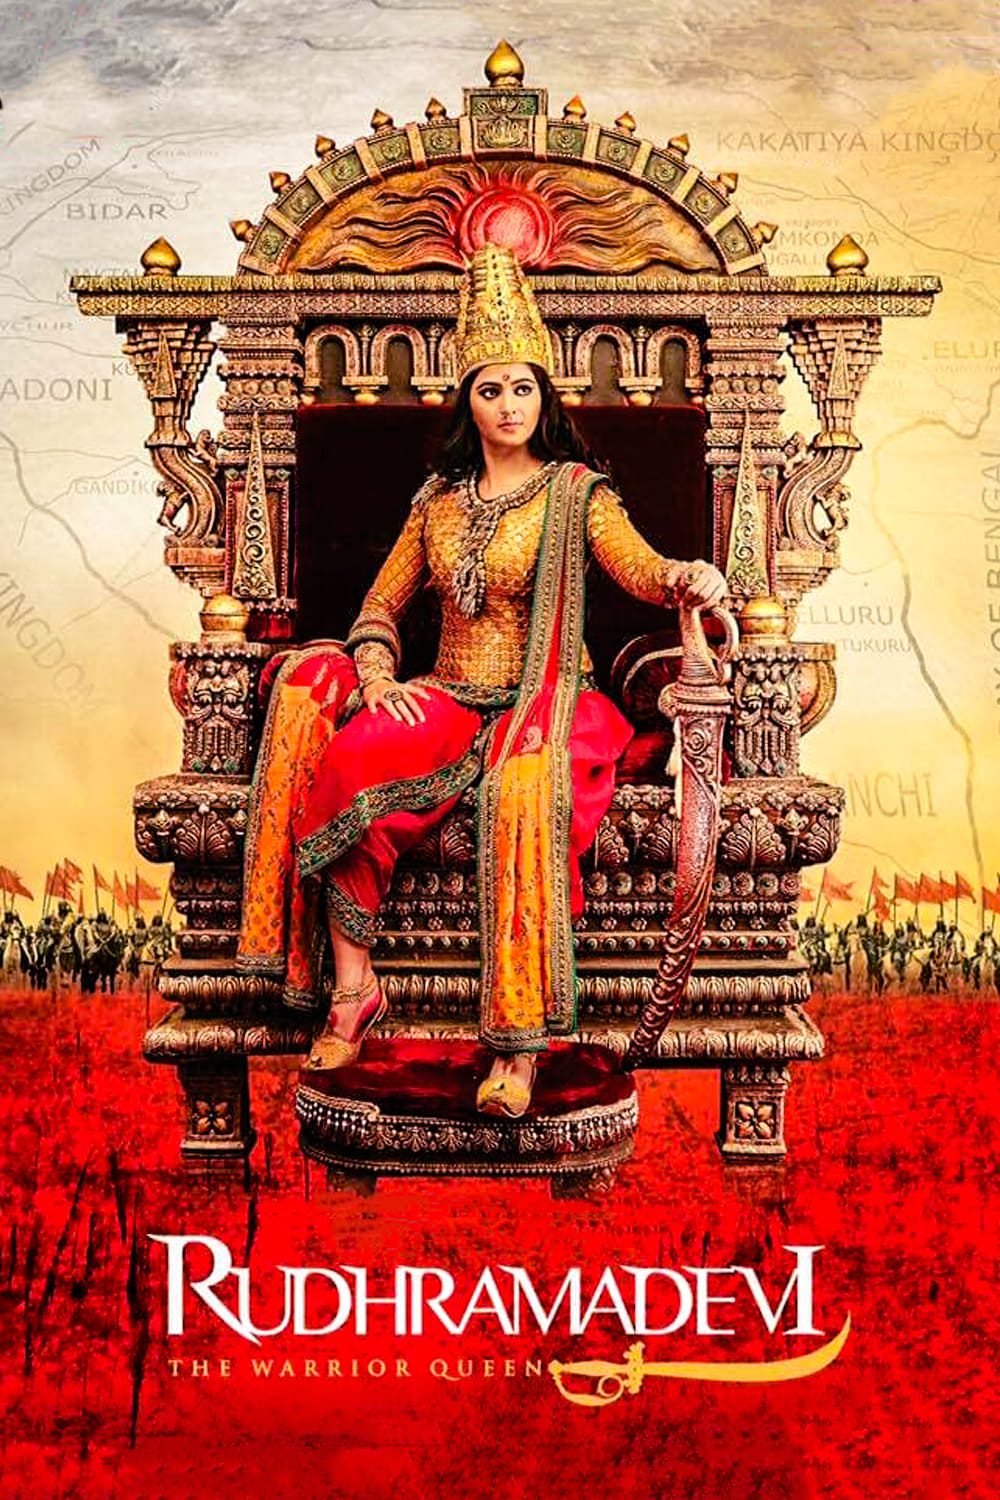 Poster for the movie "Rudhramadevi"